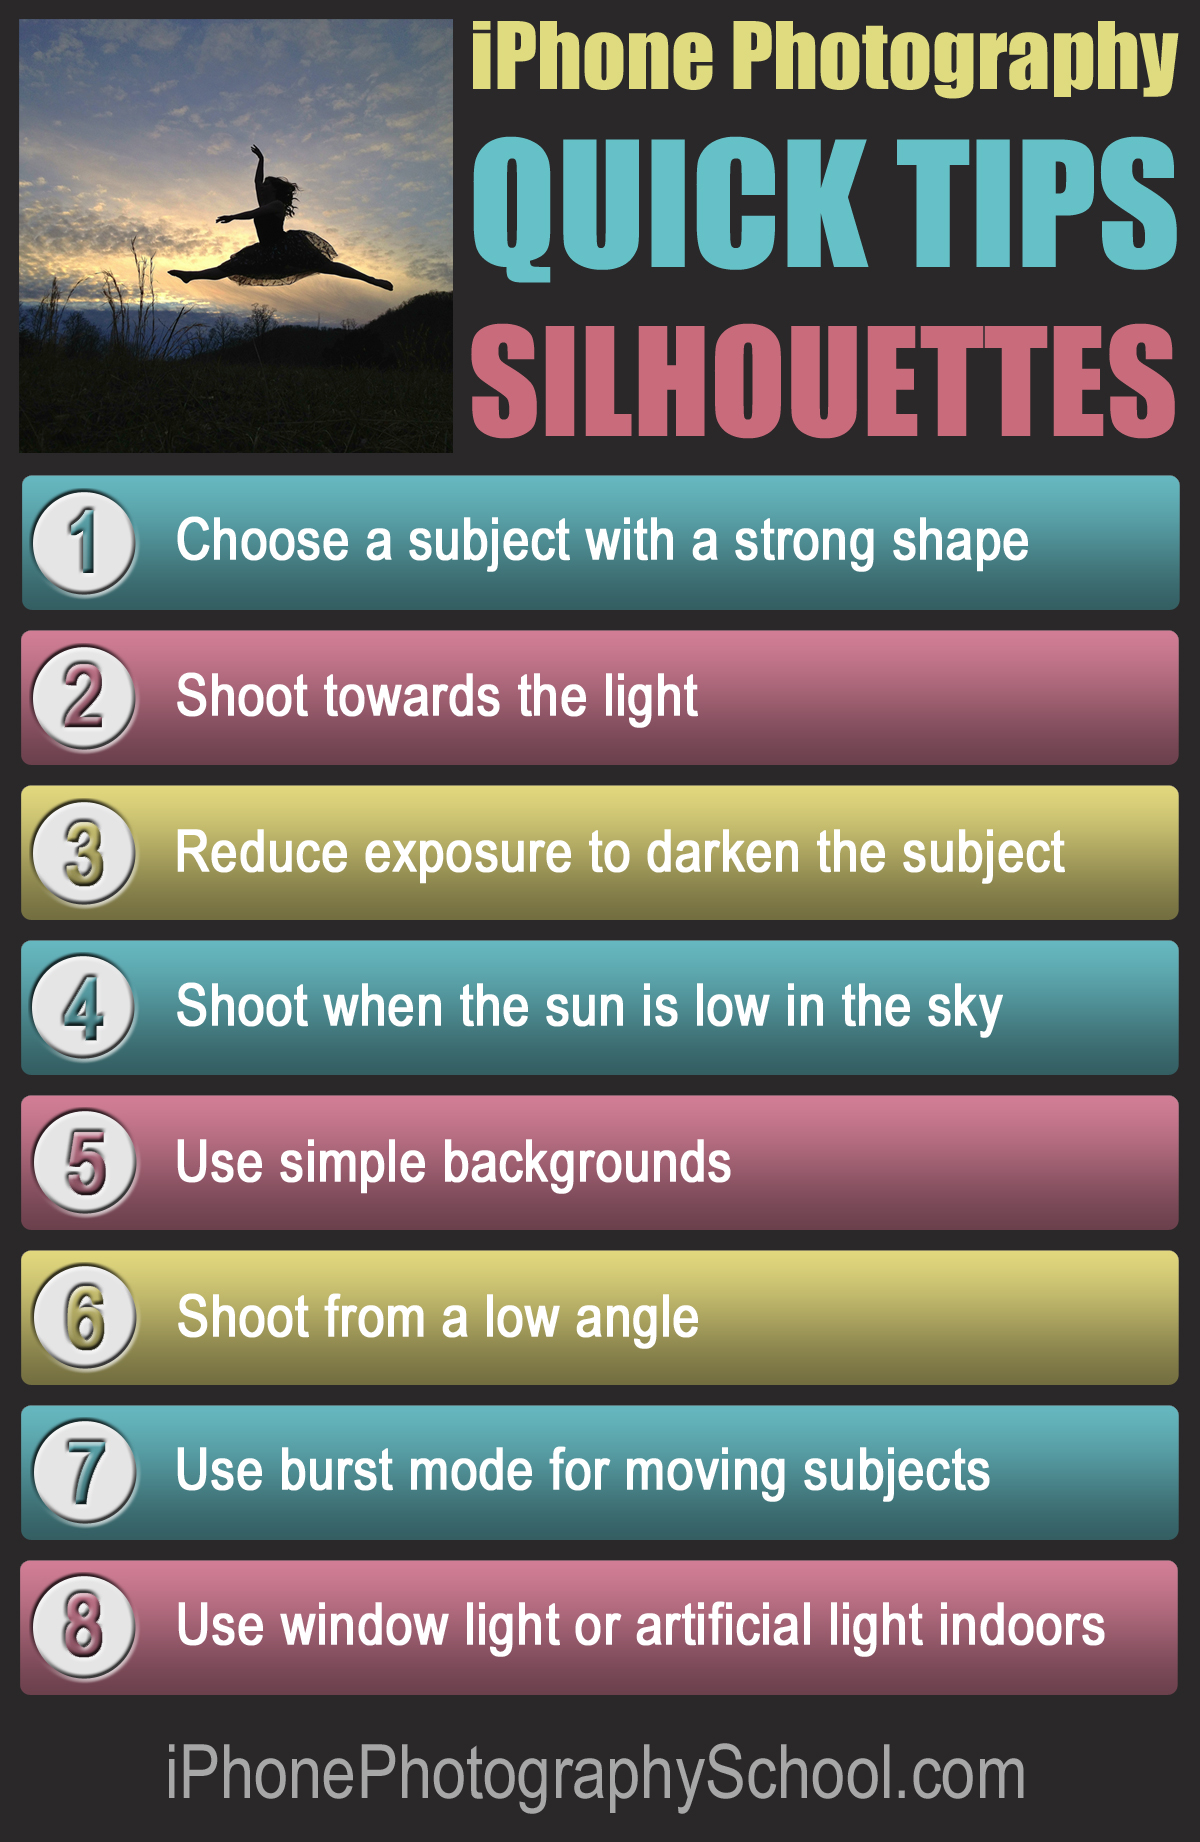 iPhone-Silhouettes-Quick-Tips-Cheat-Sheet.jpg